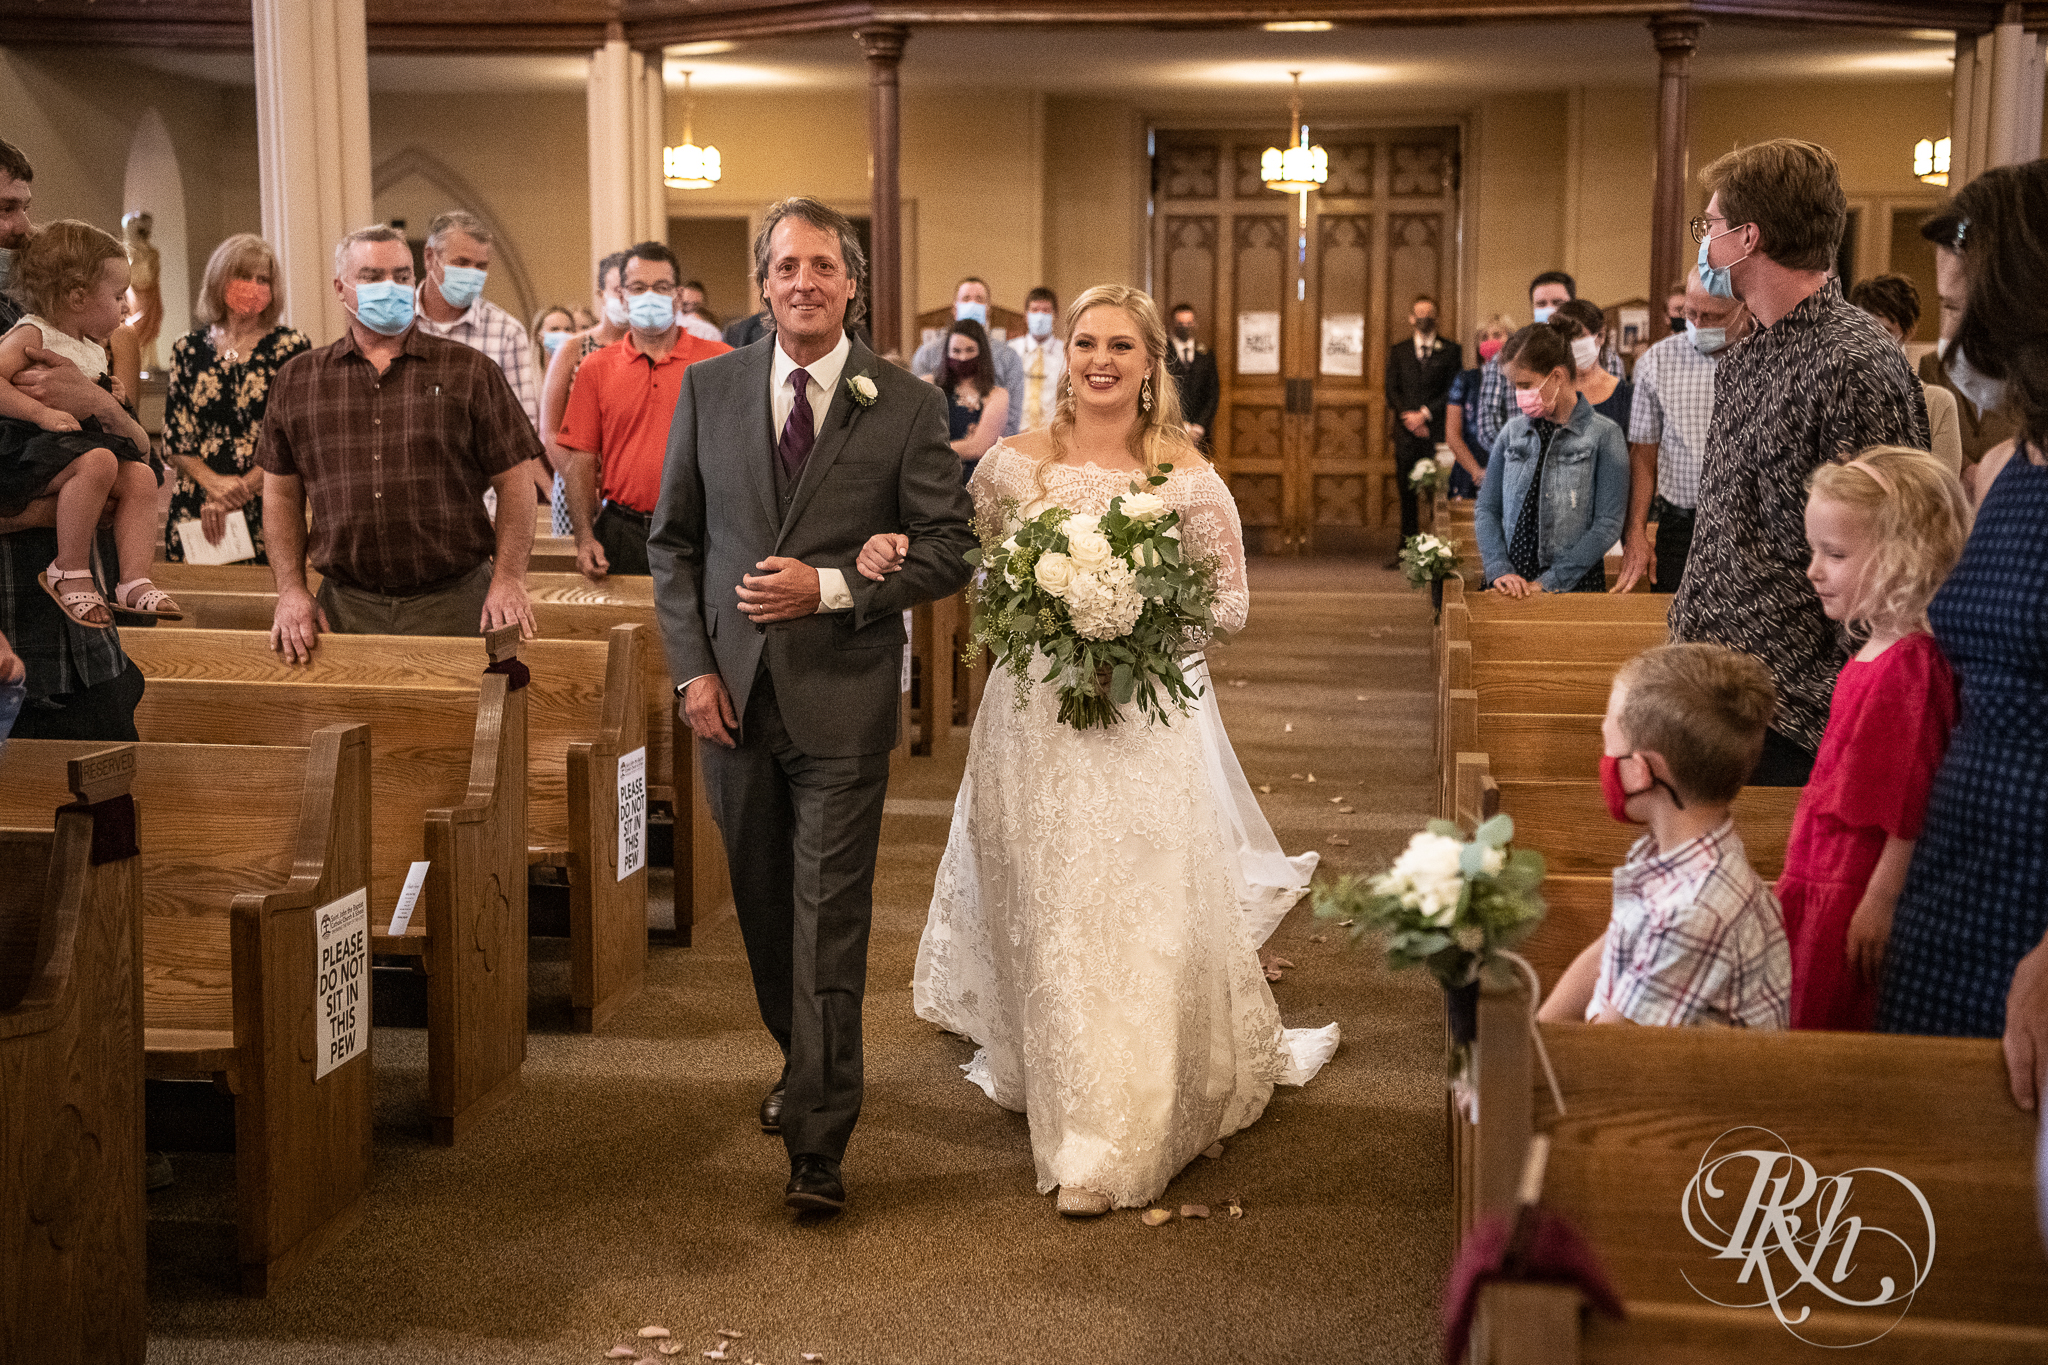 Bride walking down the aisle with her dad at church wedding in New Prague, Minnesota.